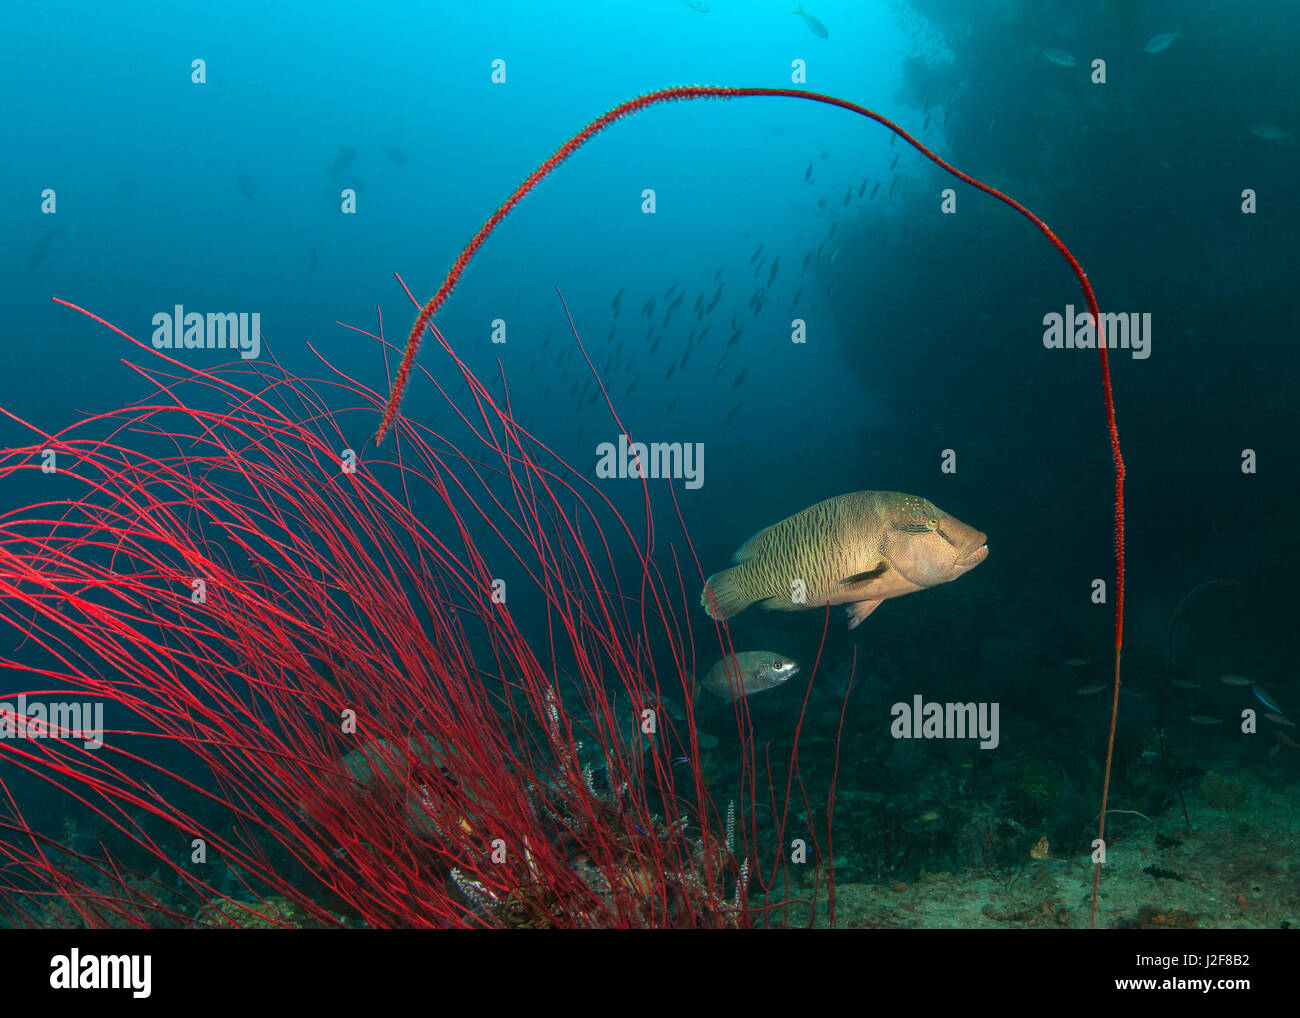 Young Napolean Wrasse framed by red whip corals. Raja Ampat, Indonesia. Stock Photo